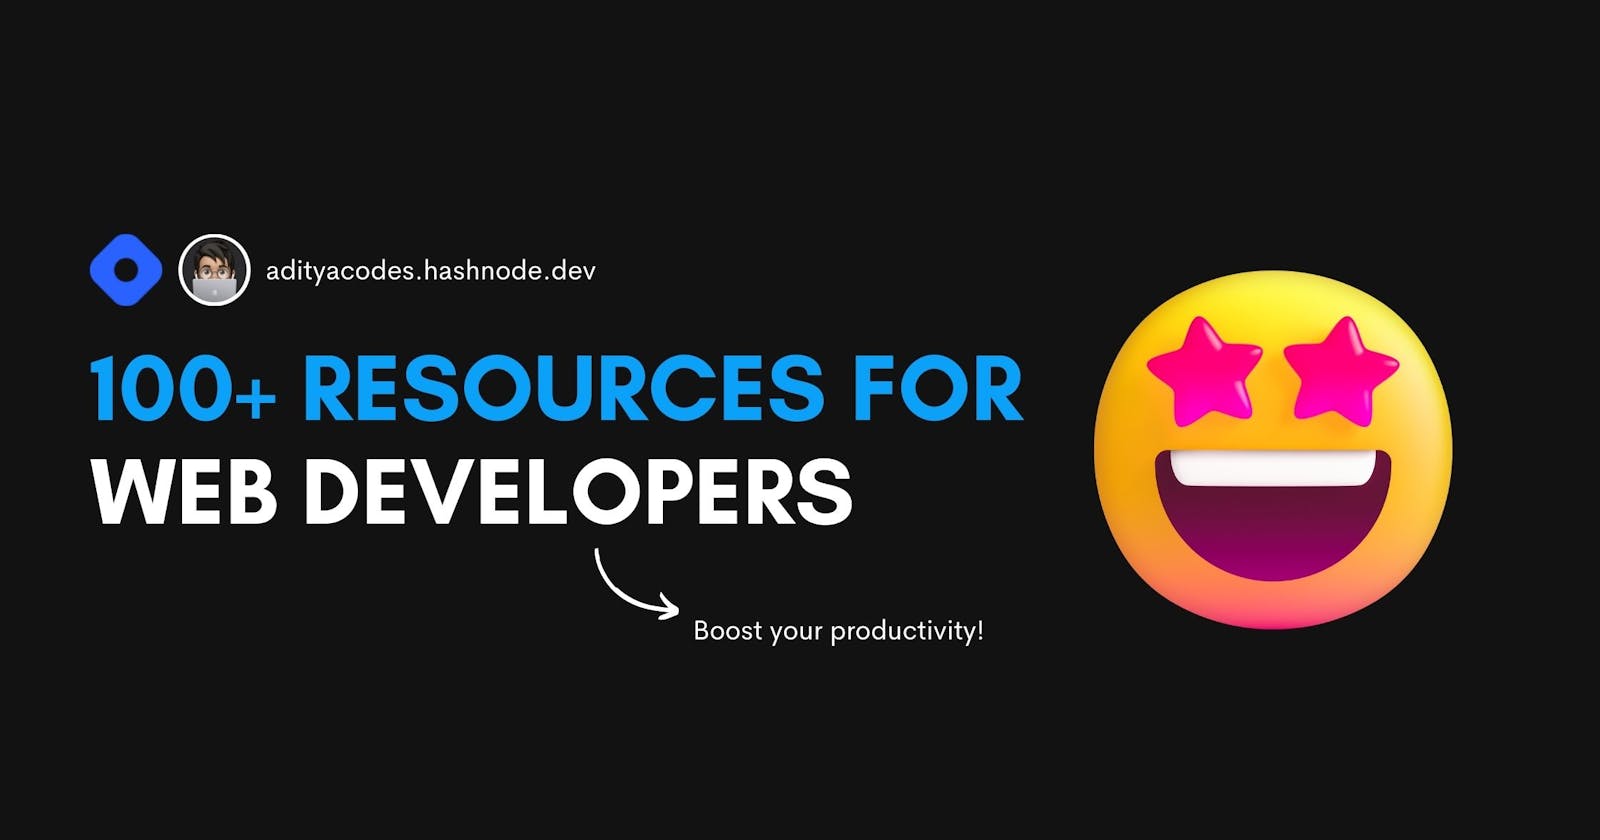 100+ Resources for Developers to Boost their productivity!